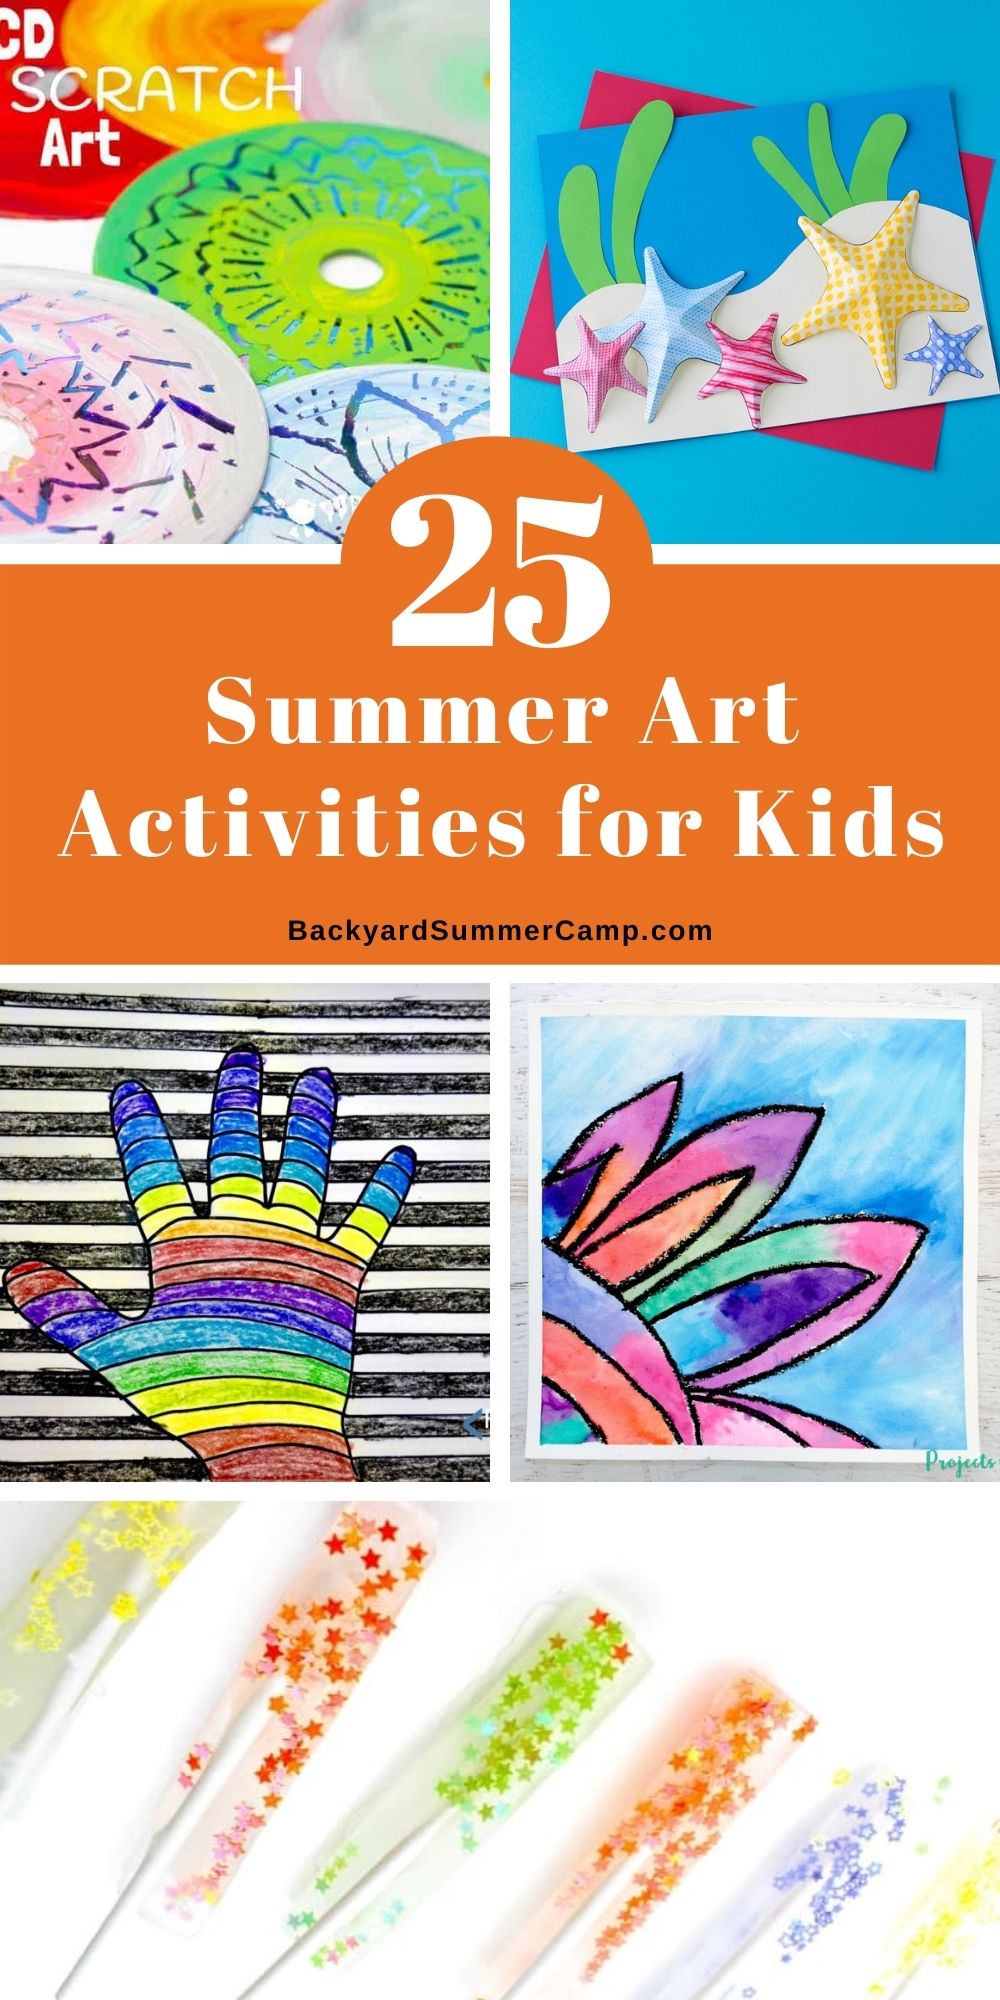 Collage of summer art activities for kids including scratch art, textured stars, hand illusion, resist art, and ice paint sticks.